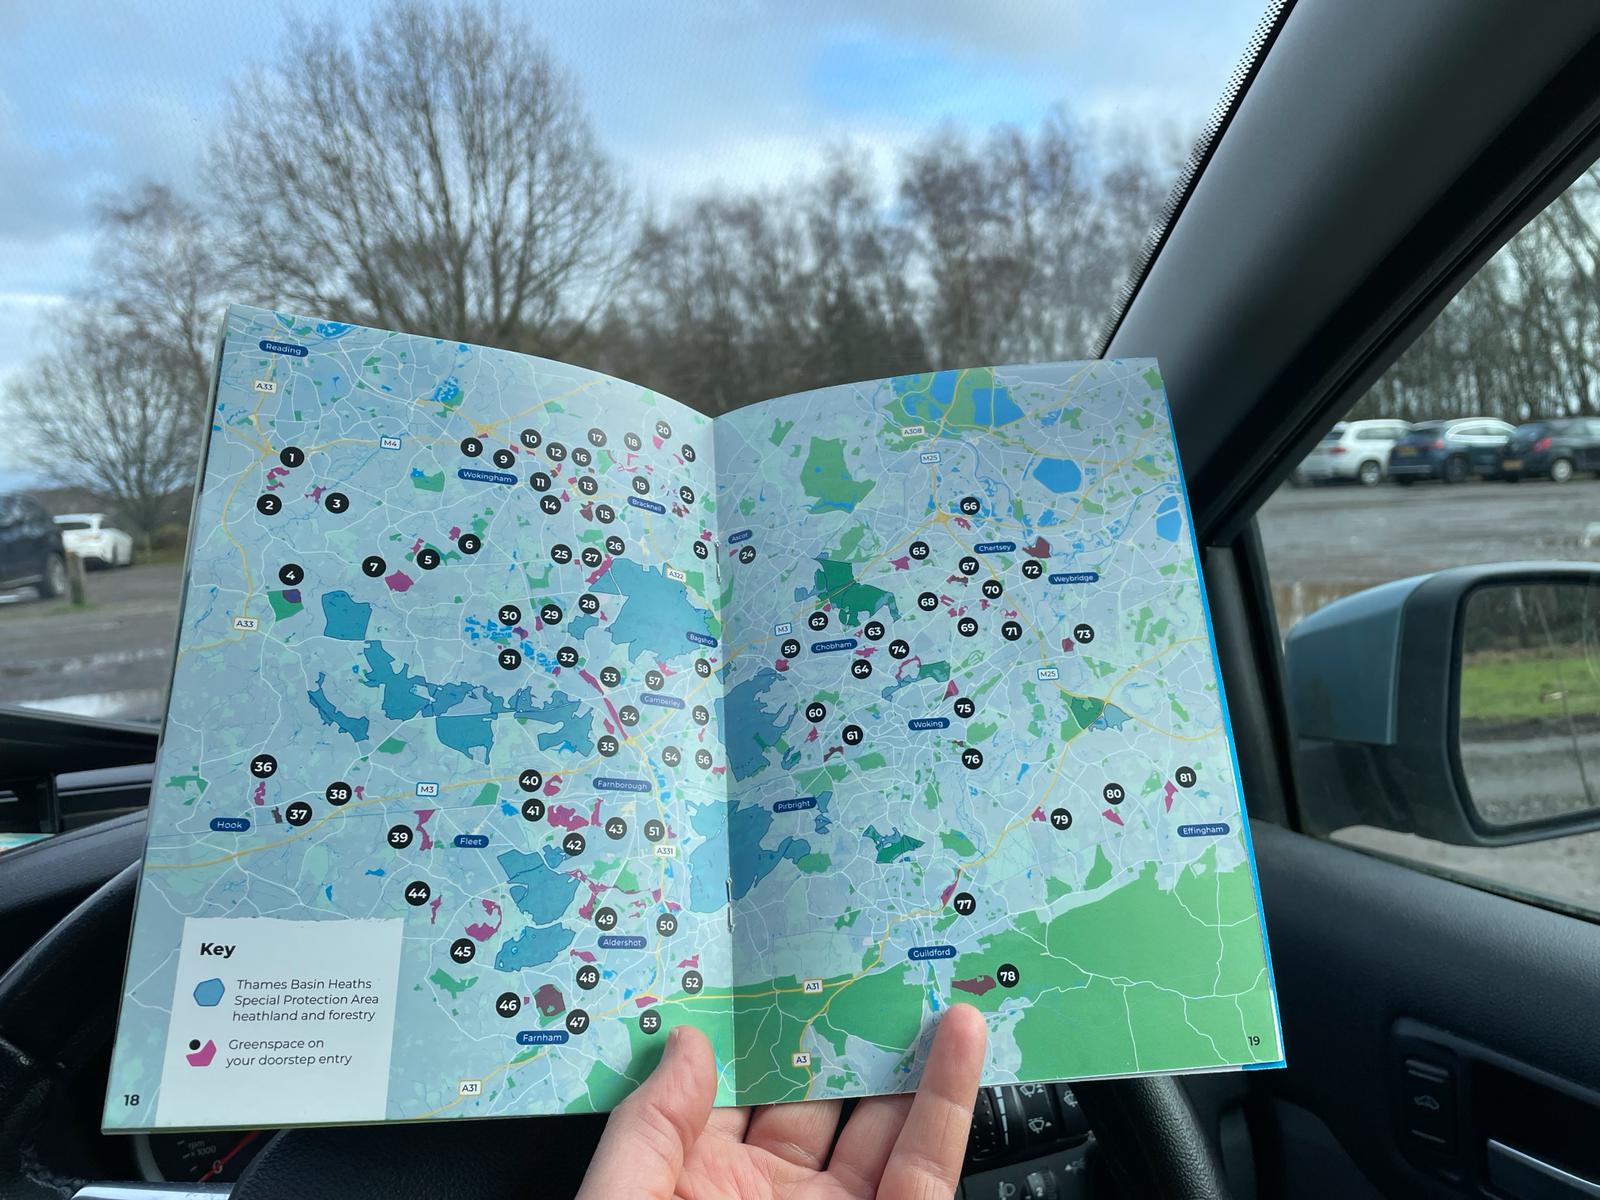 A hand holding an open booklet showing a map of heaths and numbered alternative greenspace walks